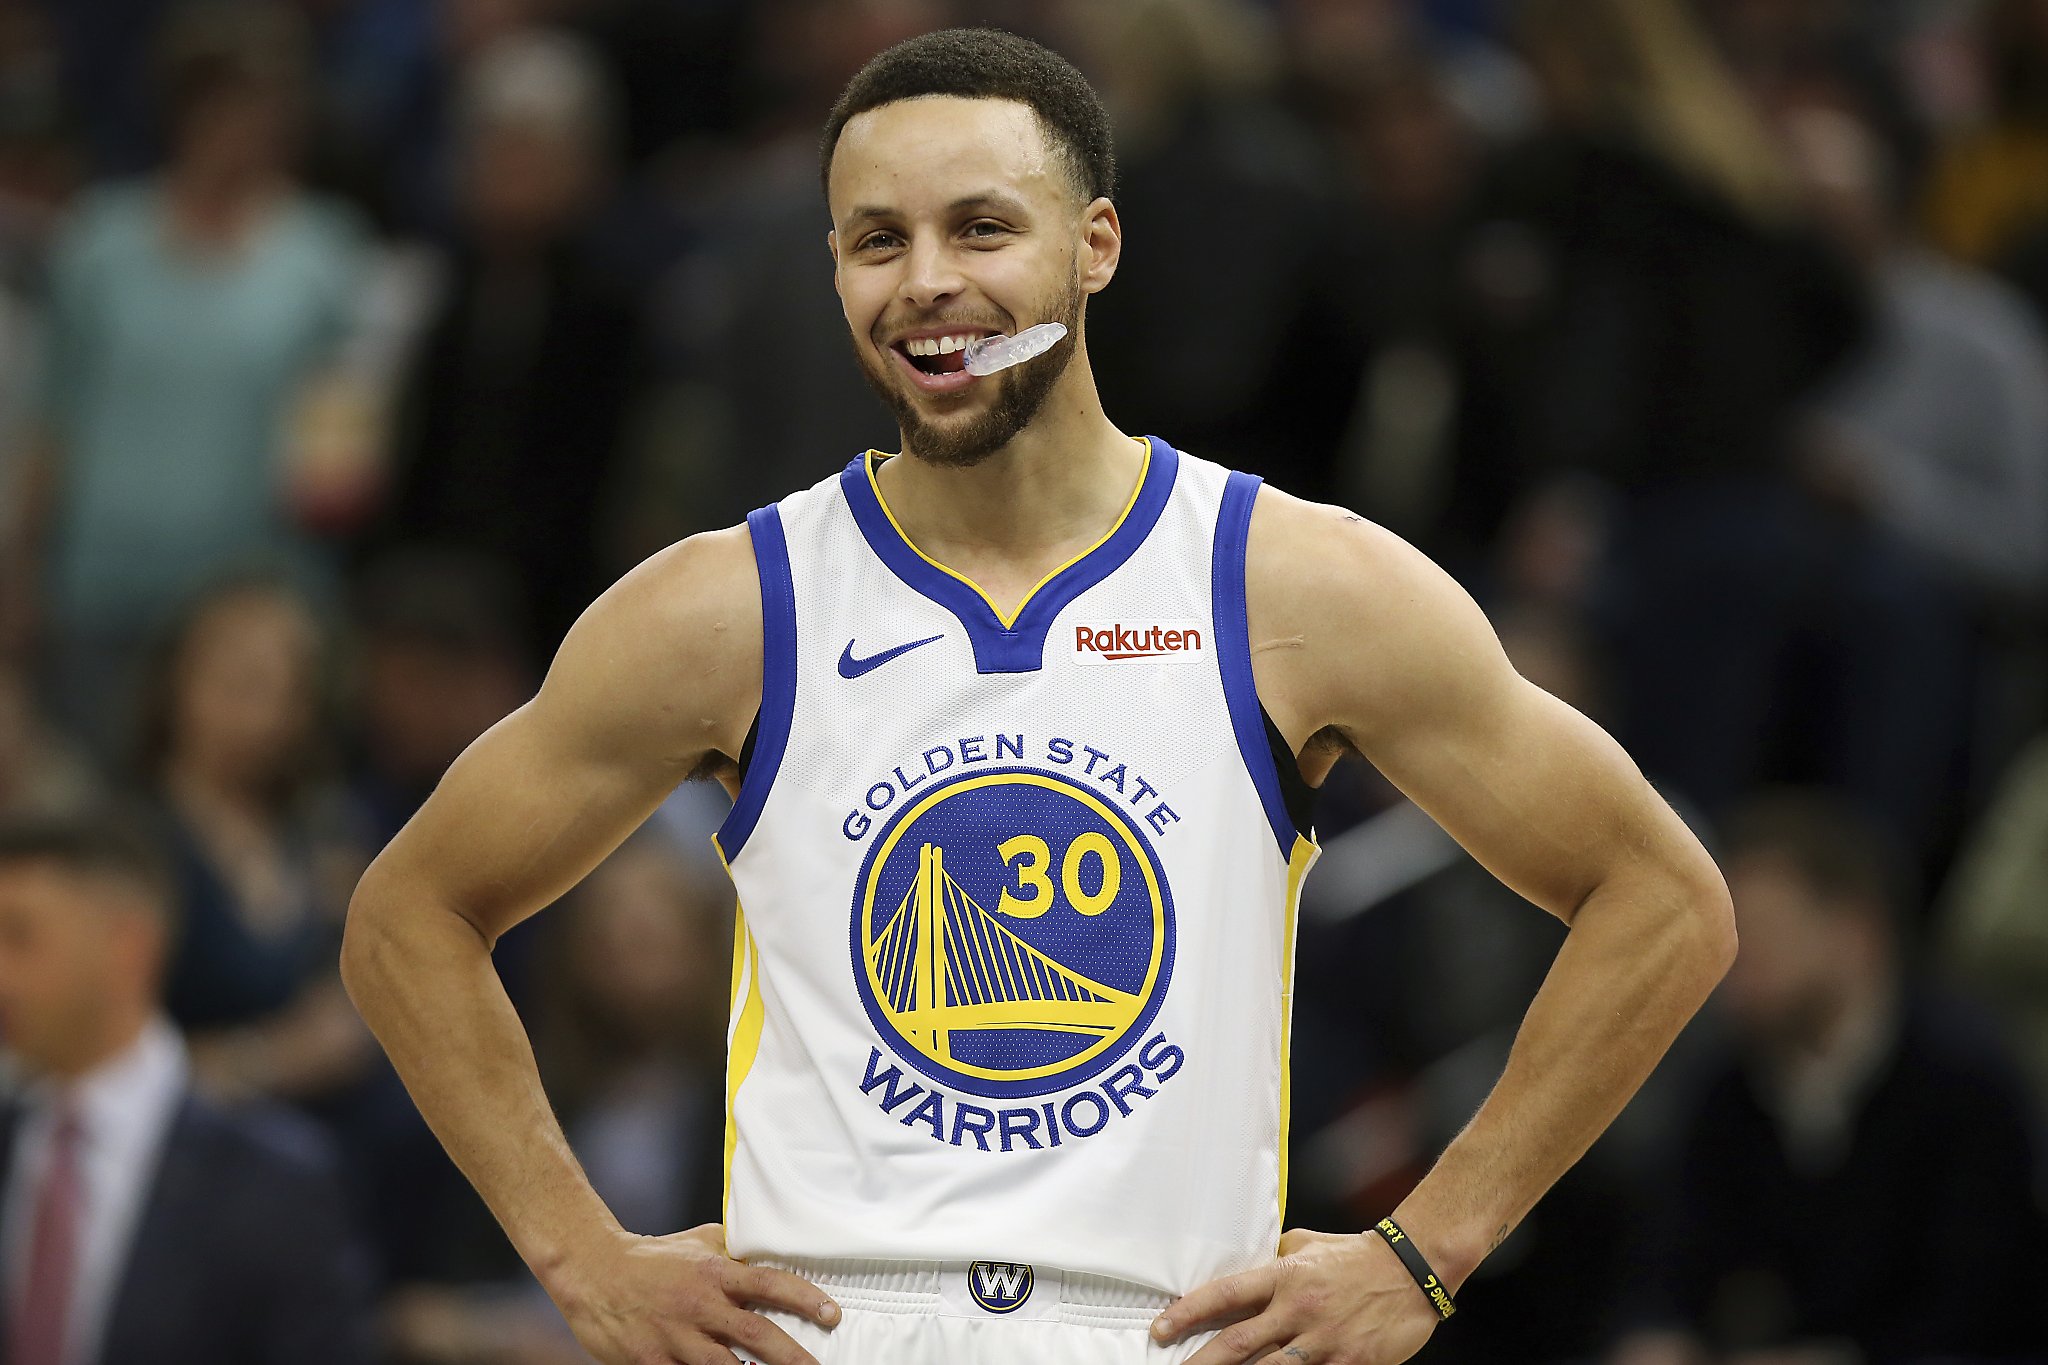 Holy cow, Stephen Curry has needed contacts this entire time